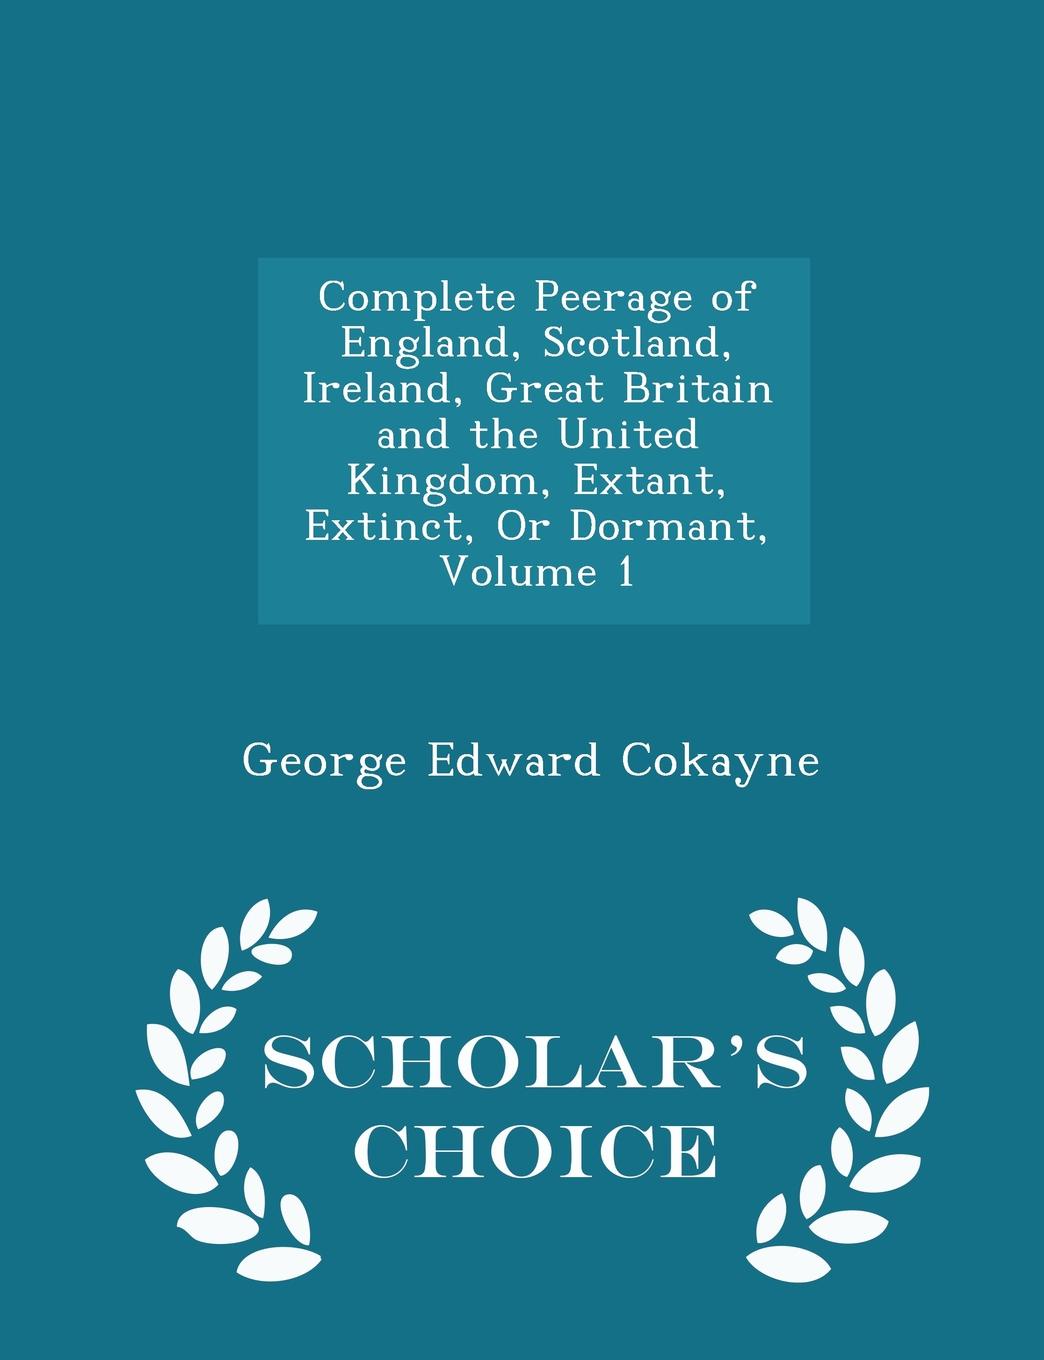 Complete Peerage of England, Scotland, Ireland, Great Britain and the United Kingdom, Extant, Extinct, Or Dormant, Volume 1 - Scholar.s Choice Edition